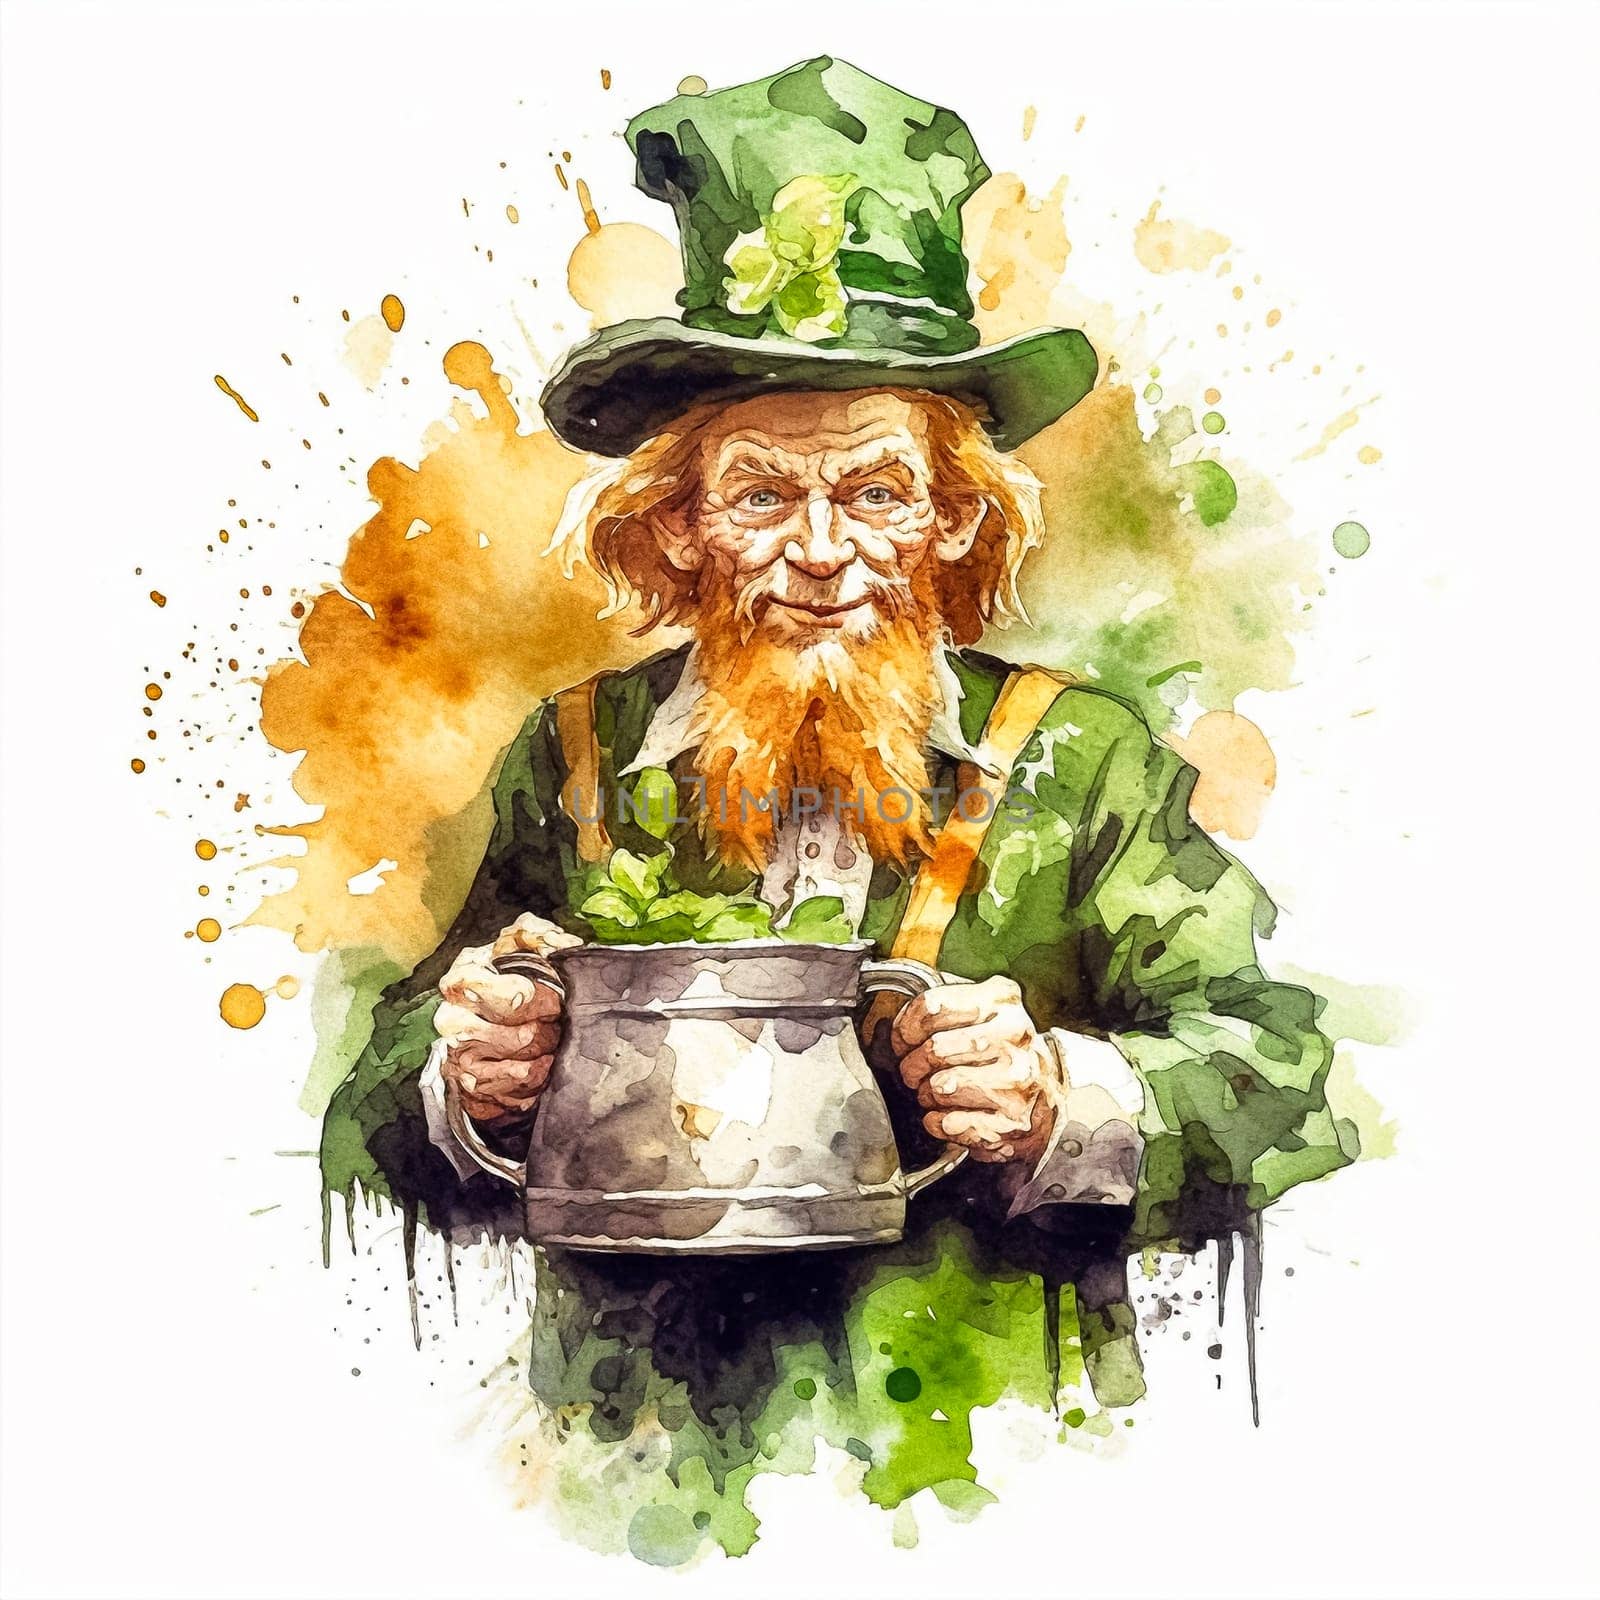 Immerse yourself in the festive spirit of St. Patrick's Day with this captivating watercolor image featuring a playful leprechaun adorned in charming green attire and hat